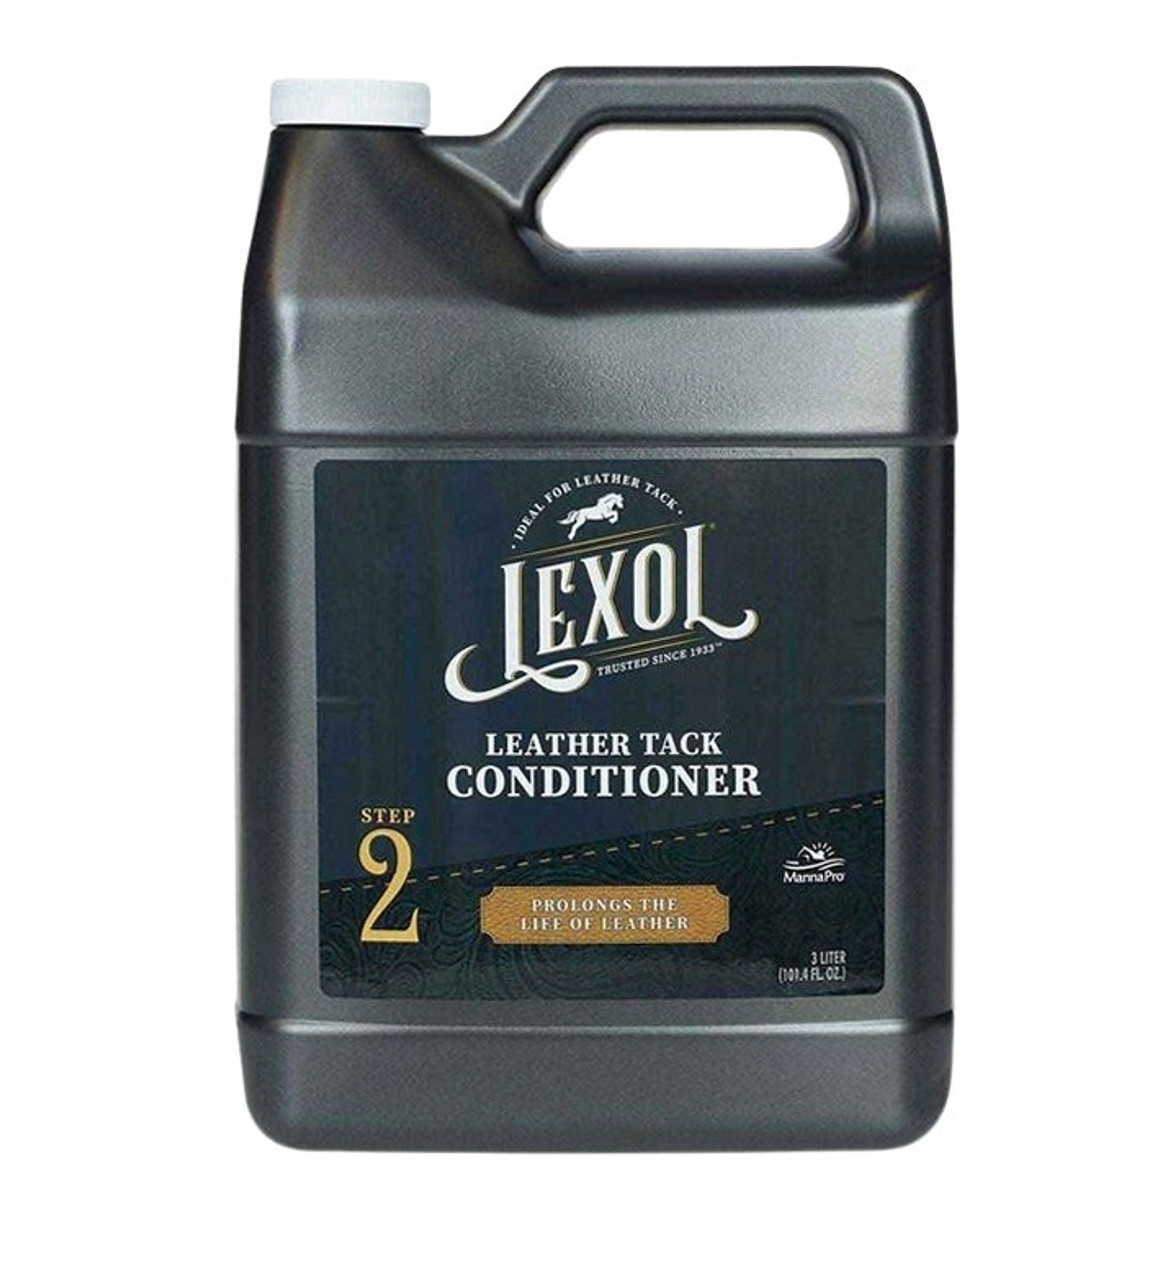 Lexol Leather Cleaners & Conditioners